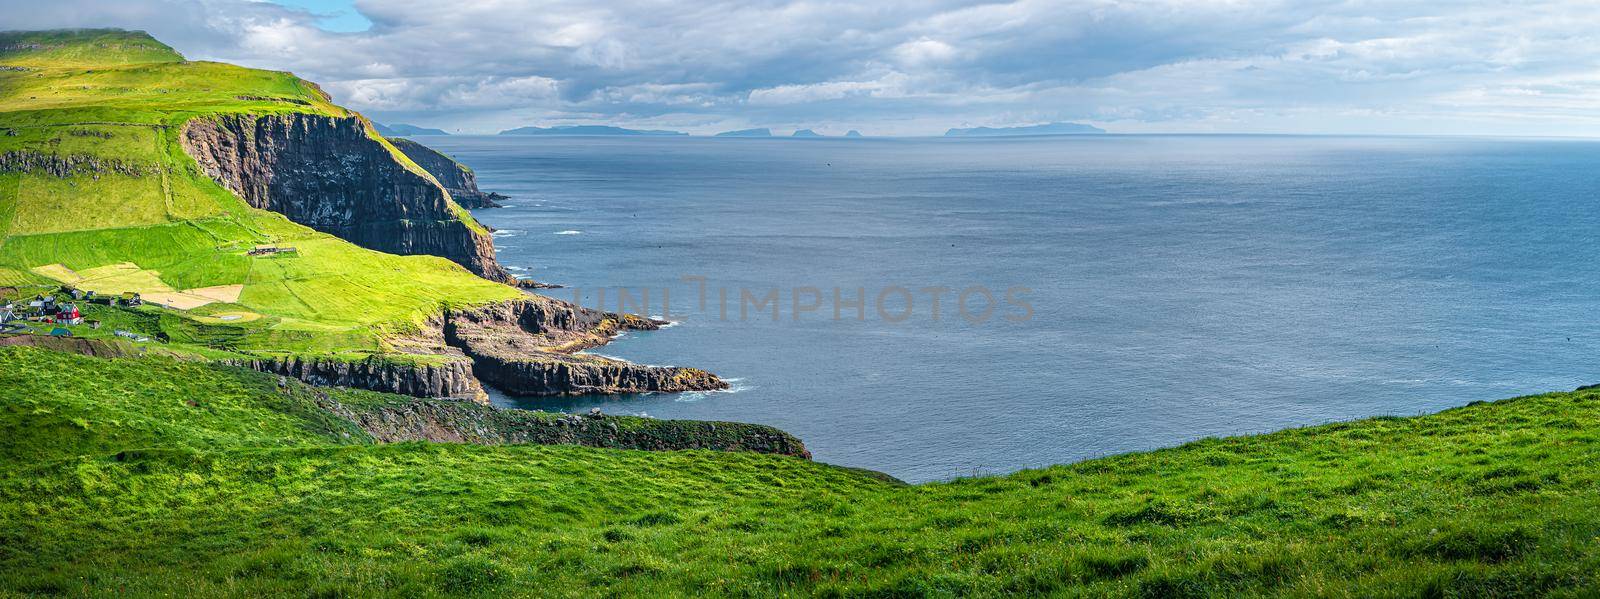 Panoramic view over mythical Faroe Island Mykines in the middle of Atlantic Ocean with a lot of puffins, parrot like seabirds, summer, blue sky by neurobite